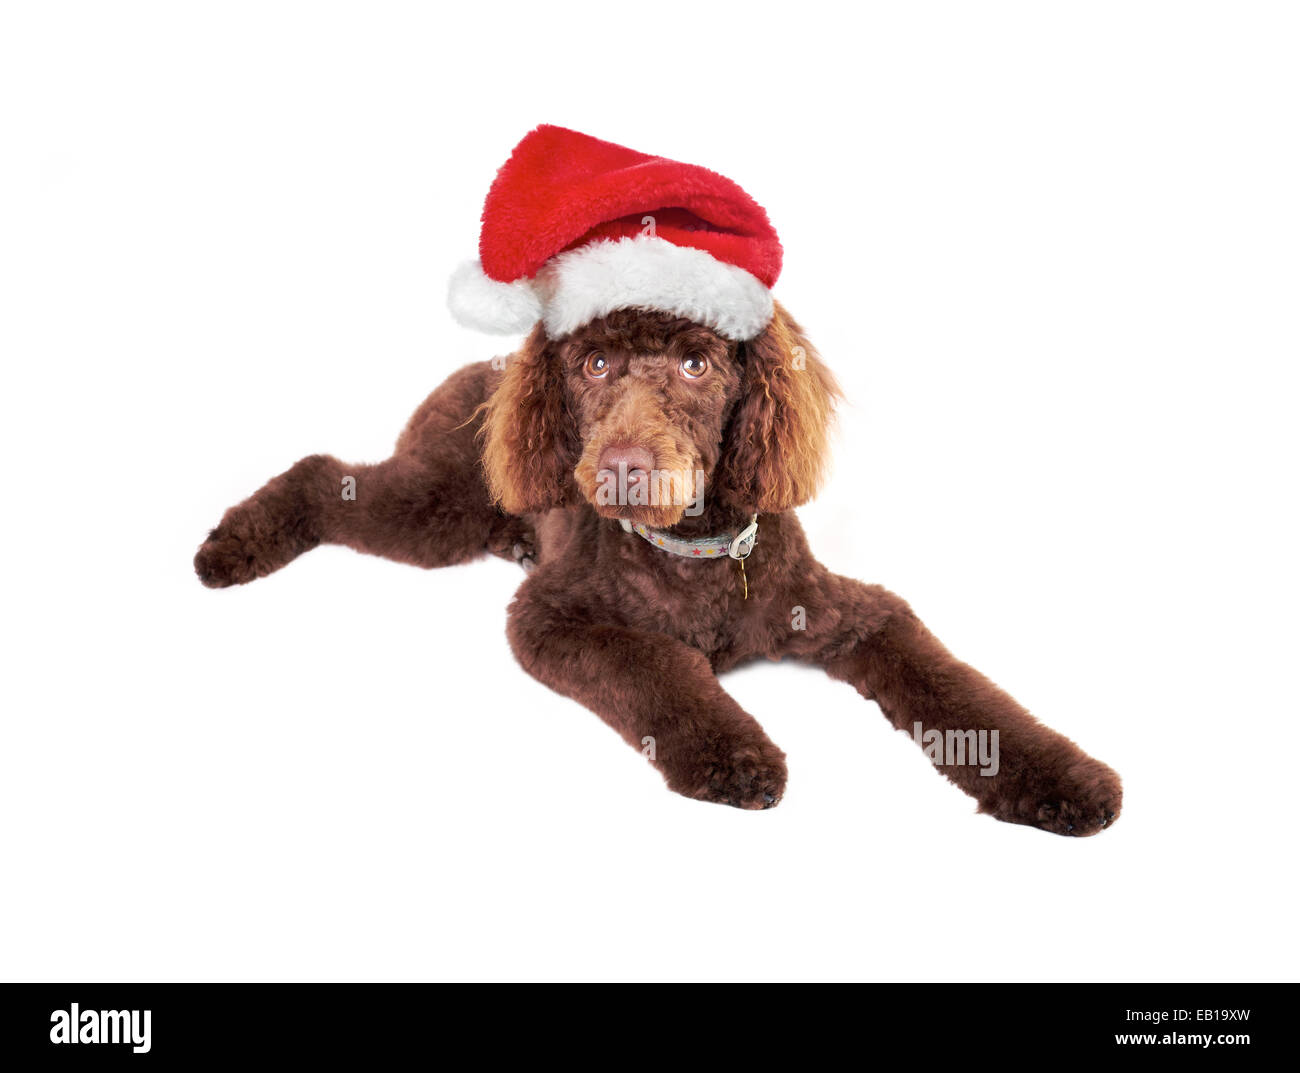 A chocolate miniature Poodle wearing a Christmas hat isolated on a white background. Stock Photo